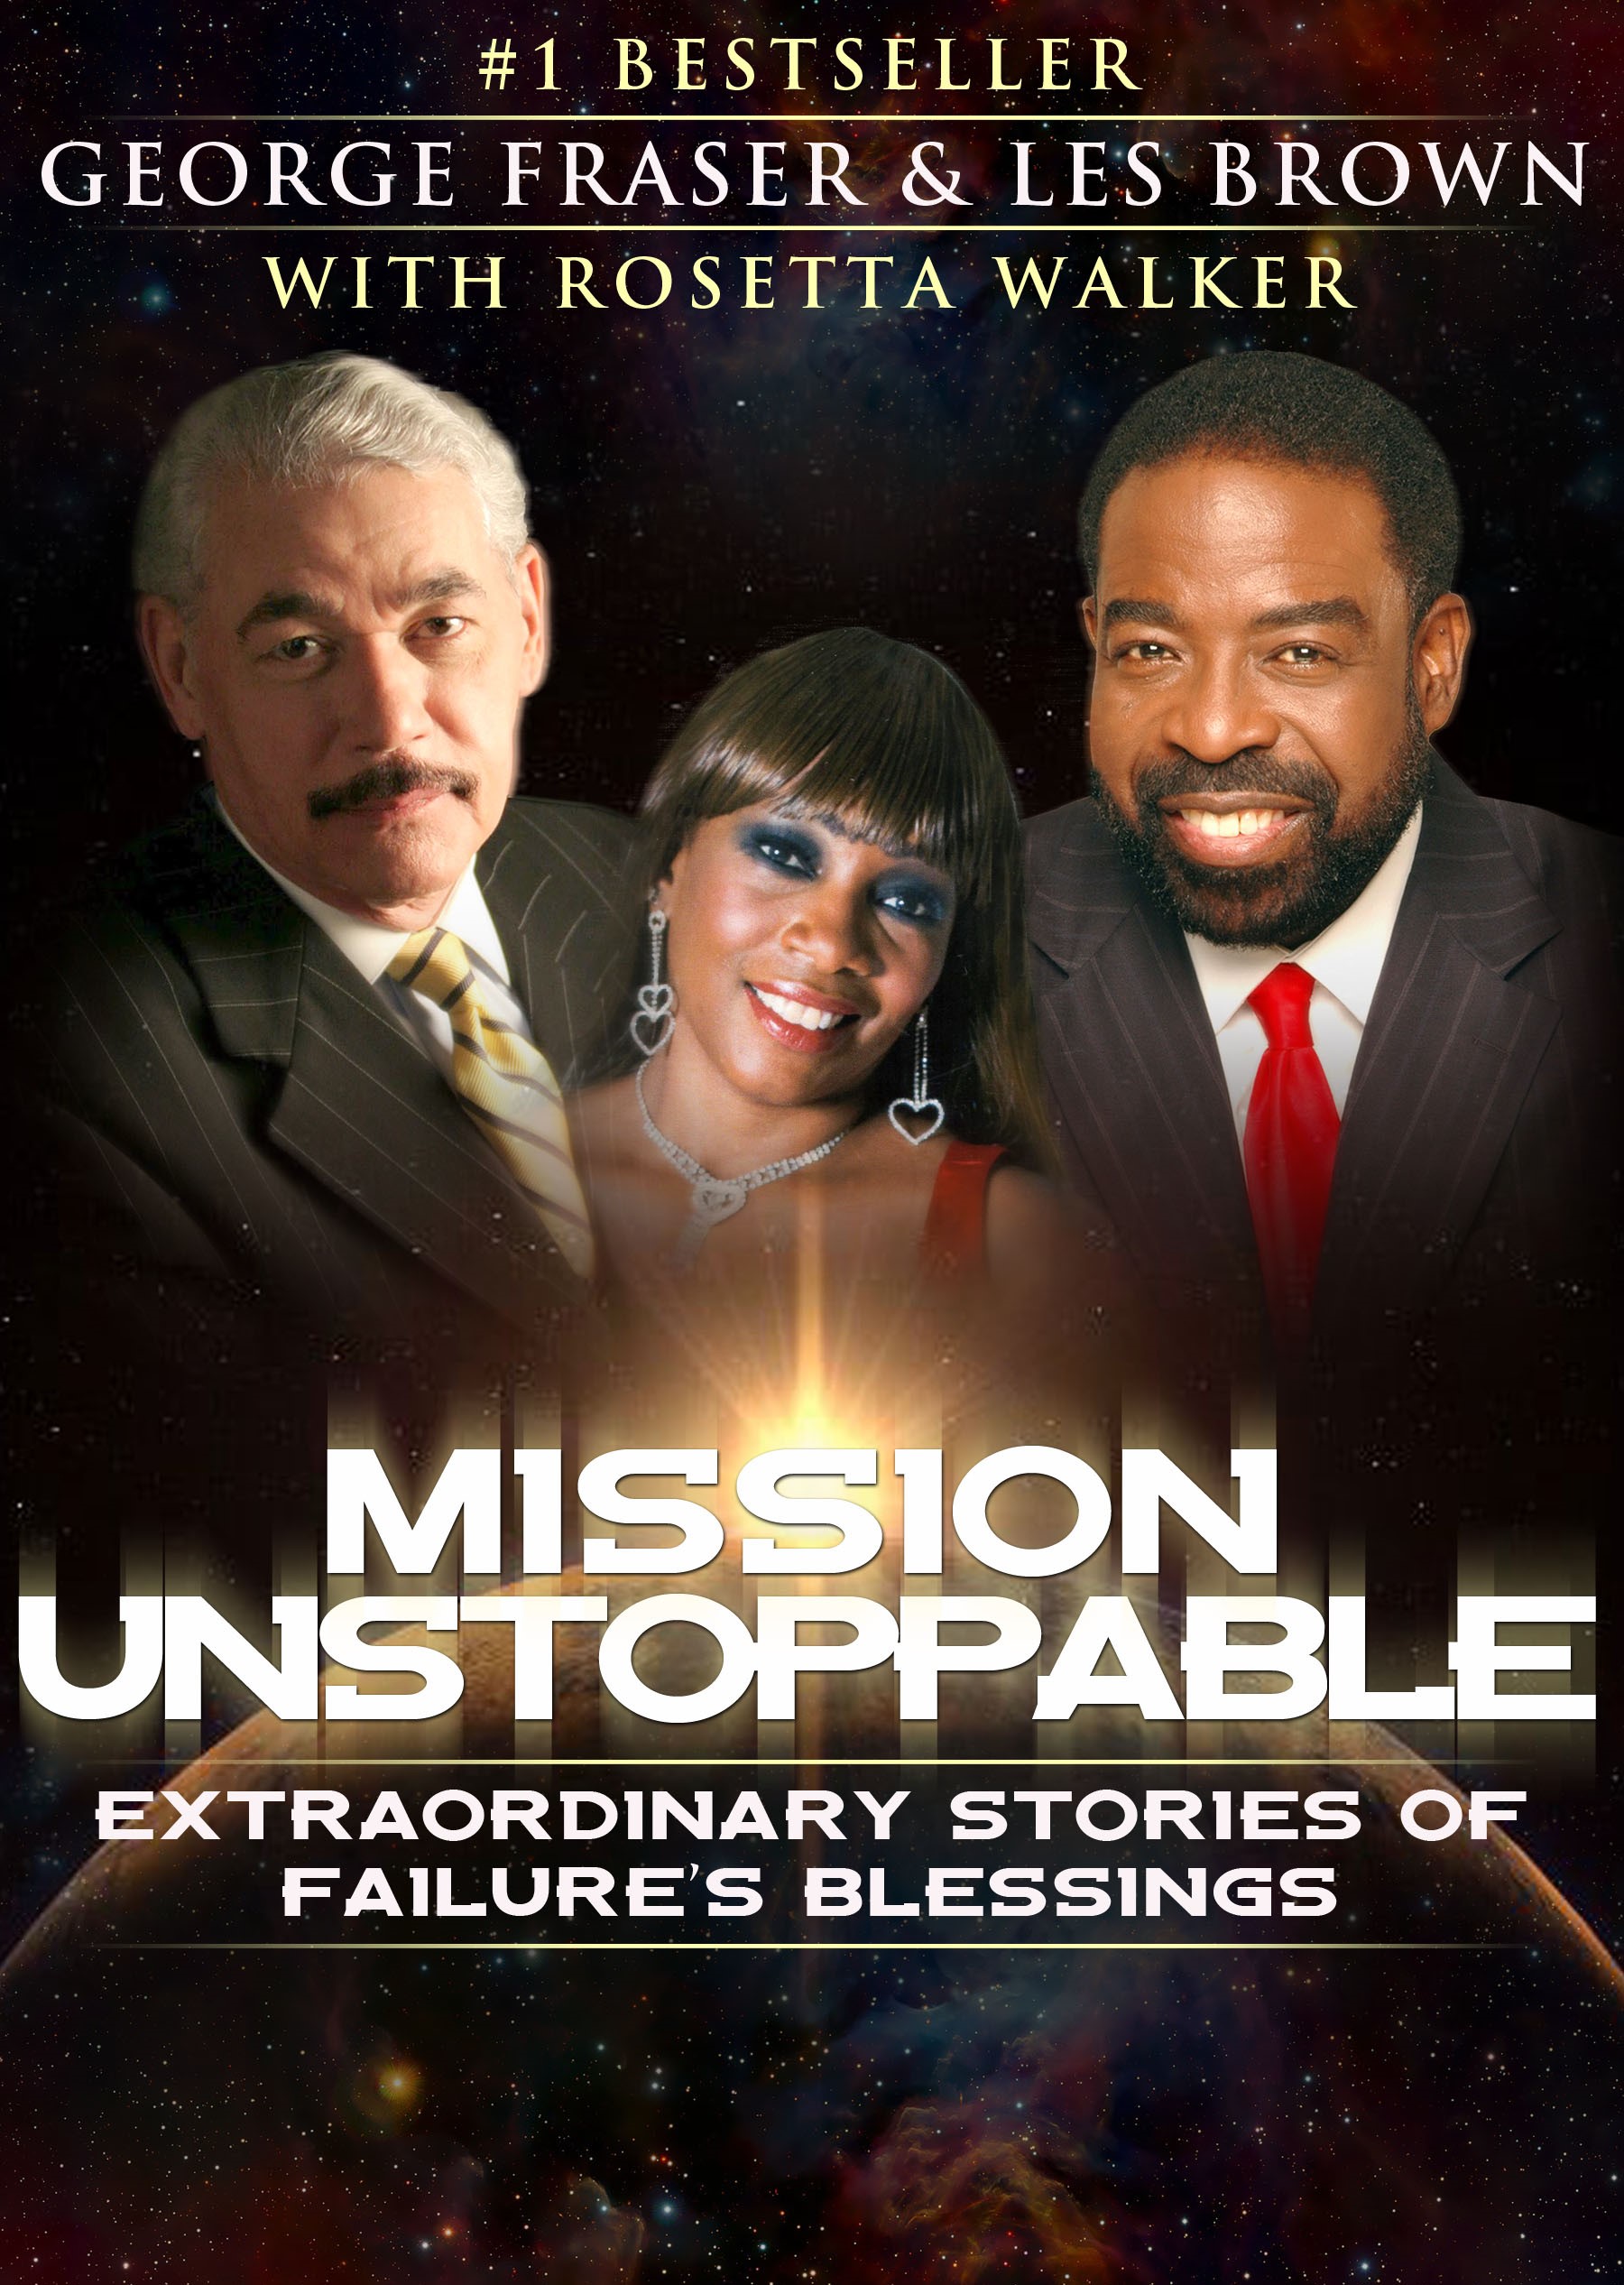 We are proud to say that our book, Mission Unstoppable is a #1 Best-selling Book on Amazon We made #1 in FOUR categories